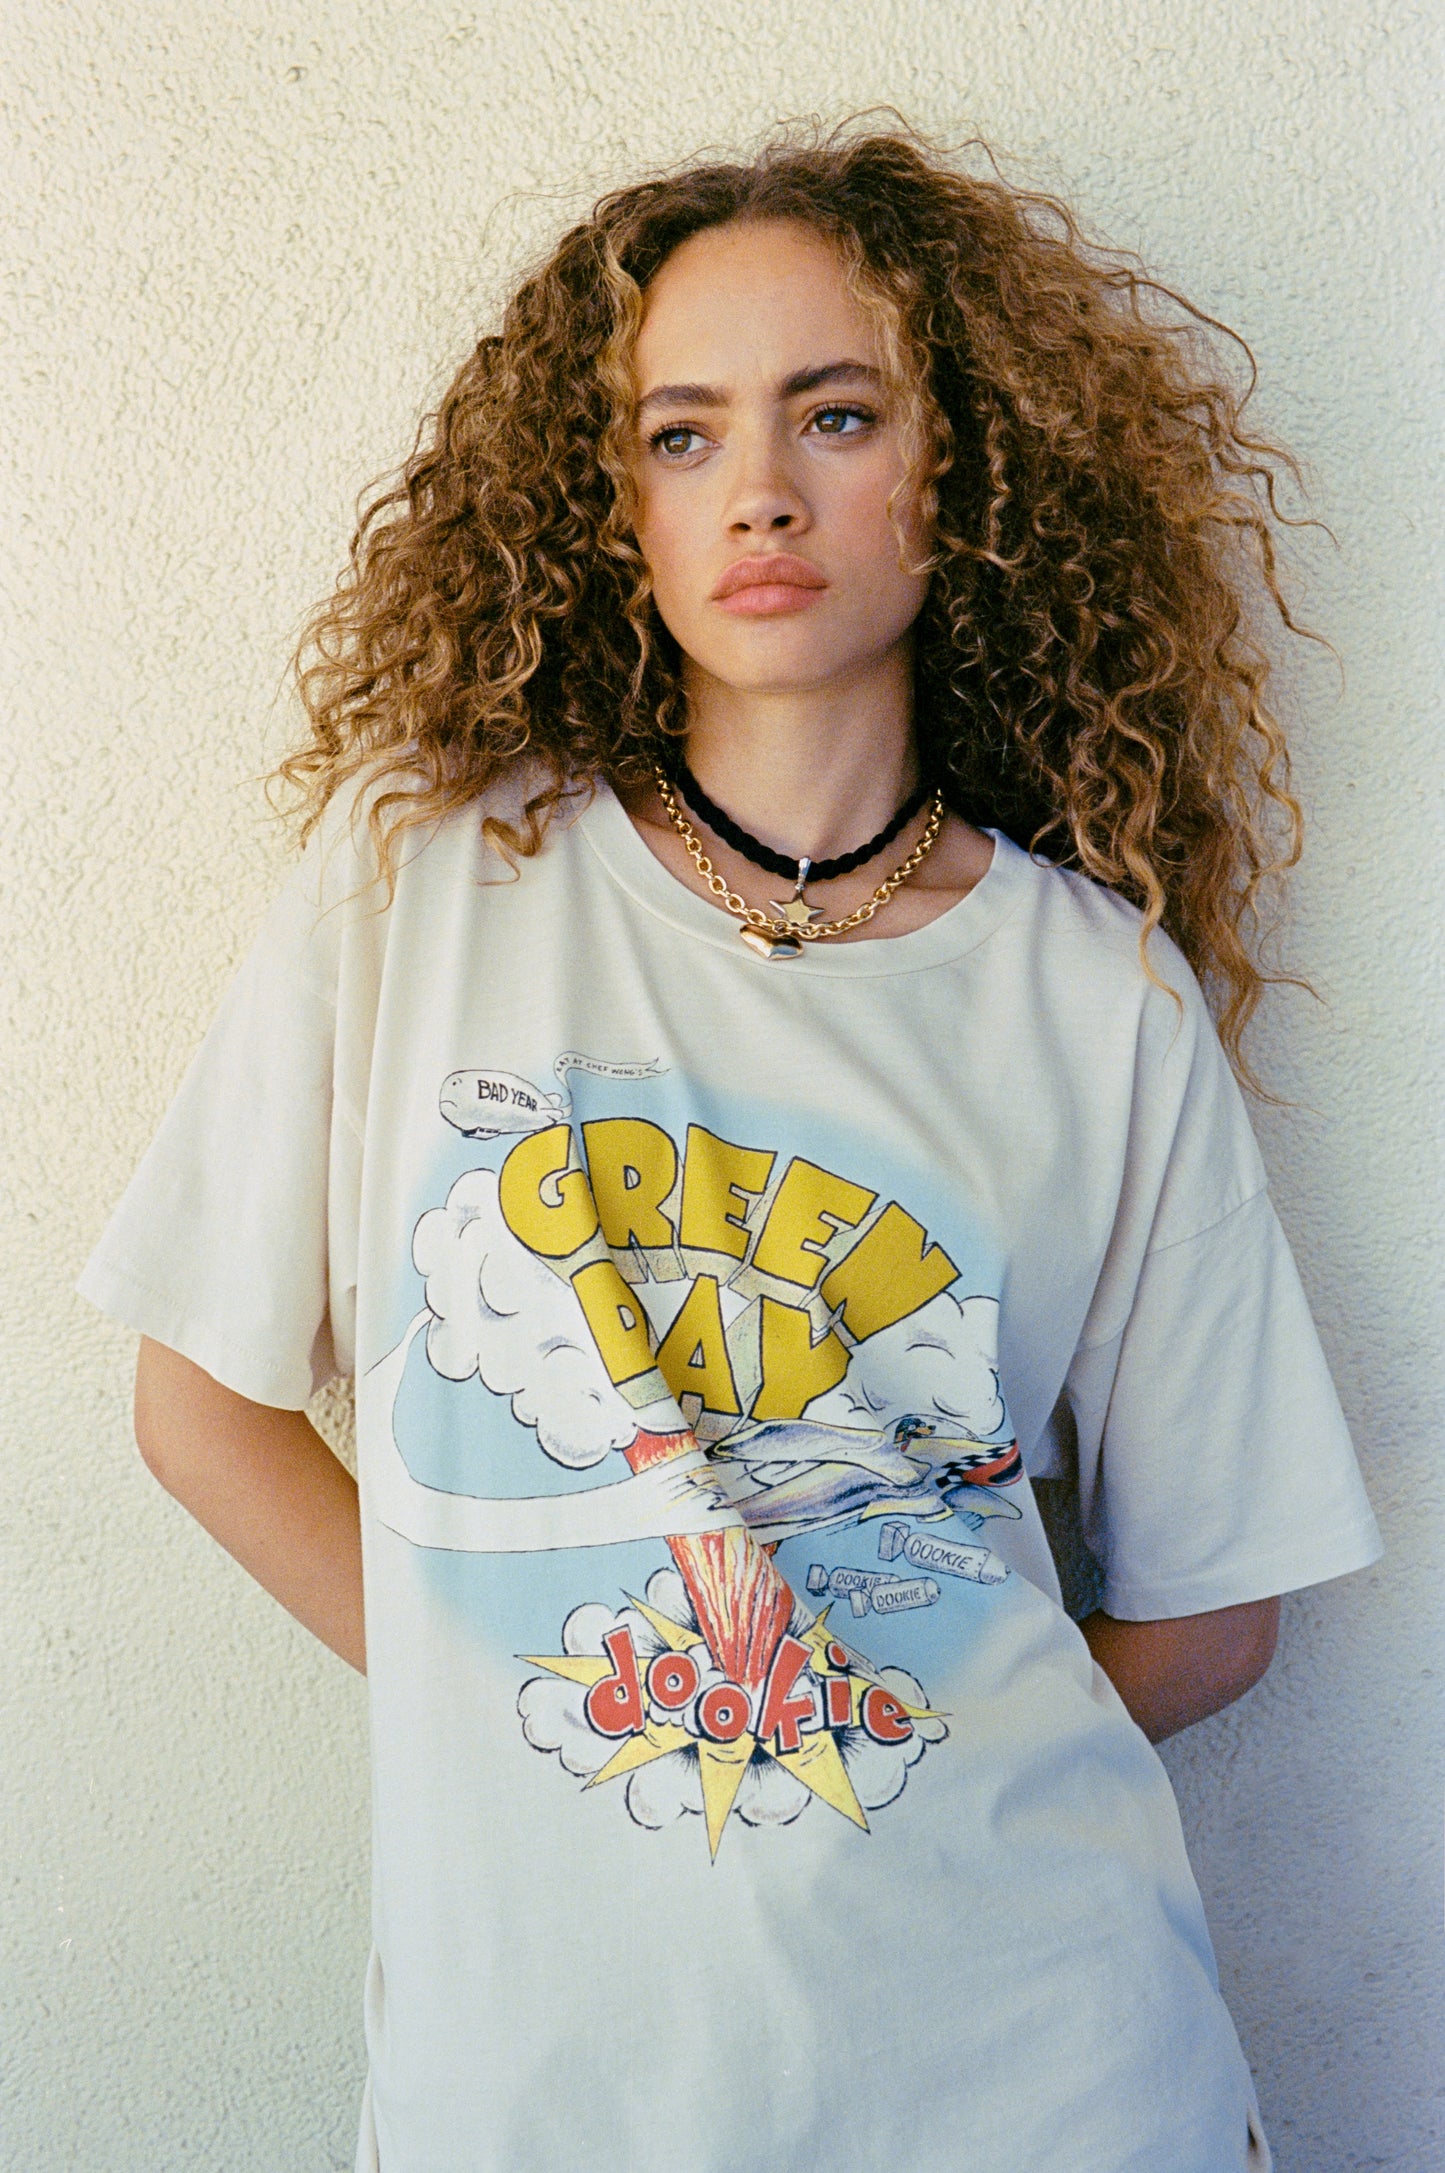 A curly-haired model featuring a white tee designed with the Green Day's album Dookie cover.